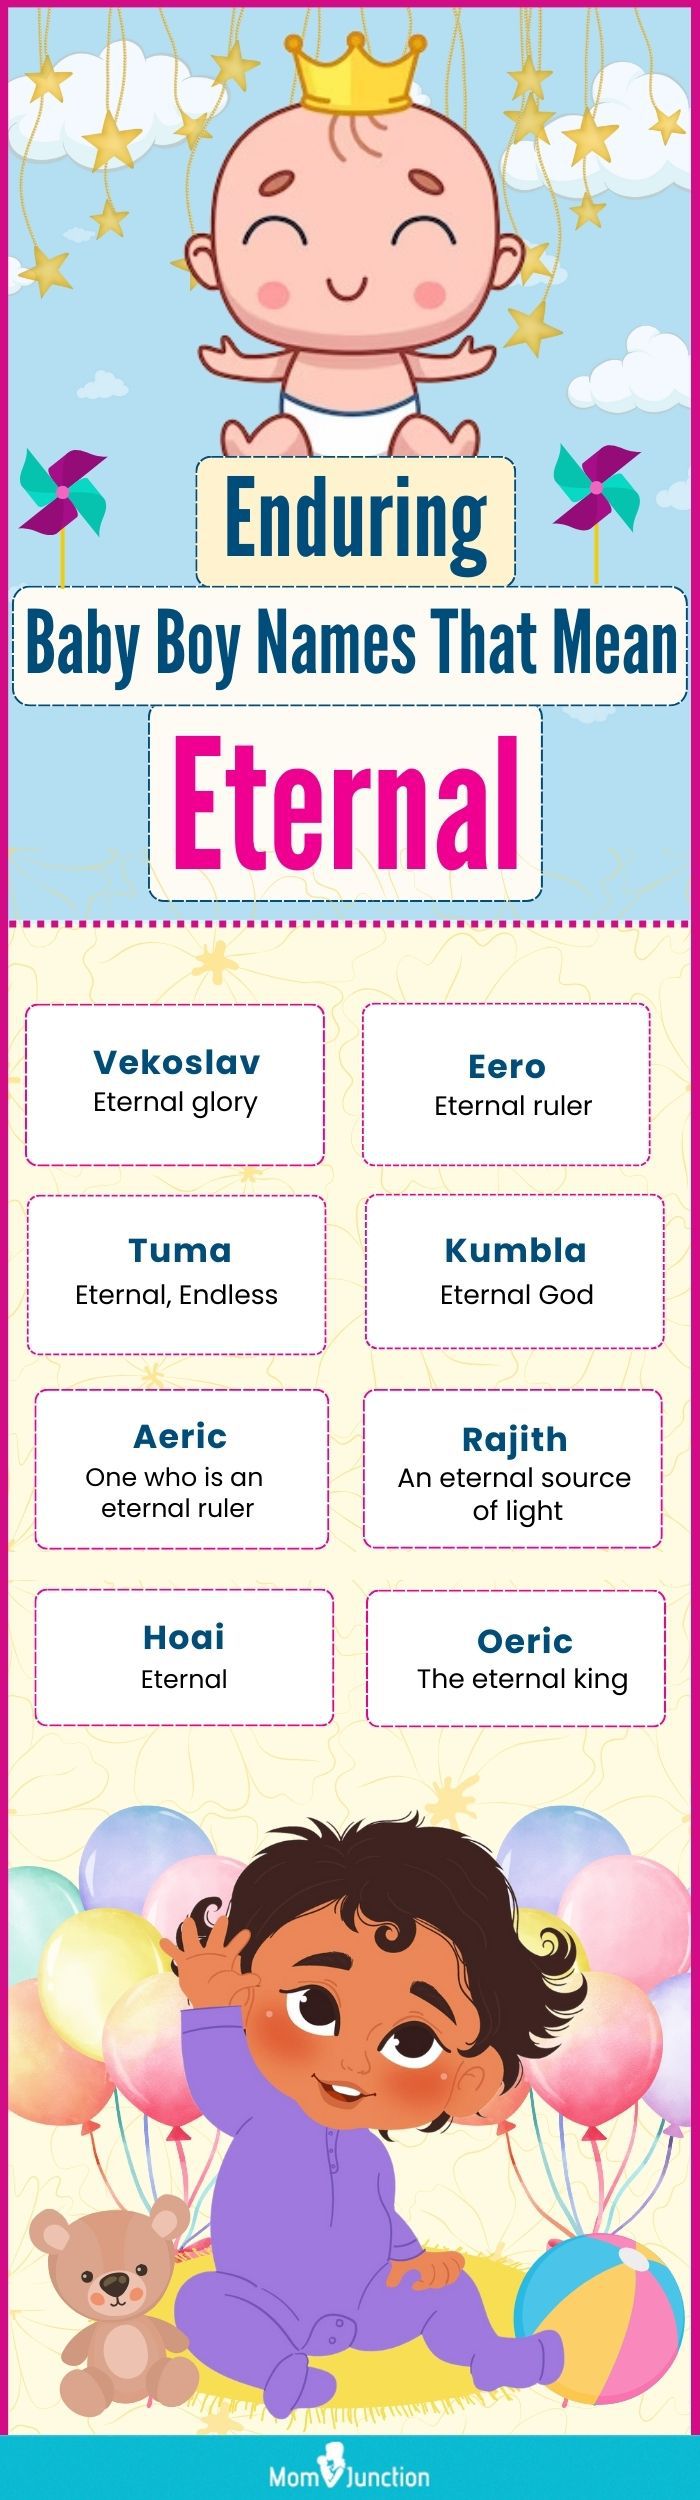 enduring baby boy names that mean eternal (infographic)